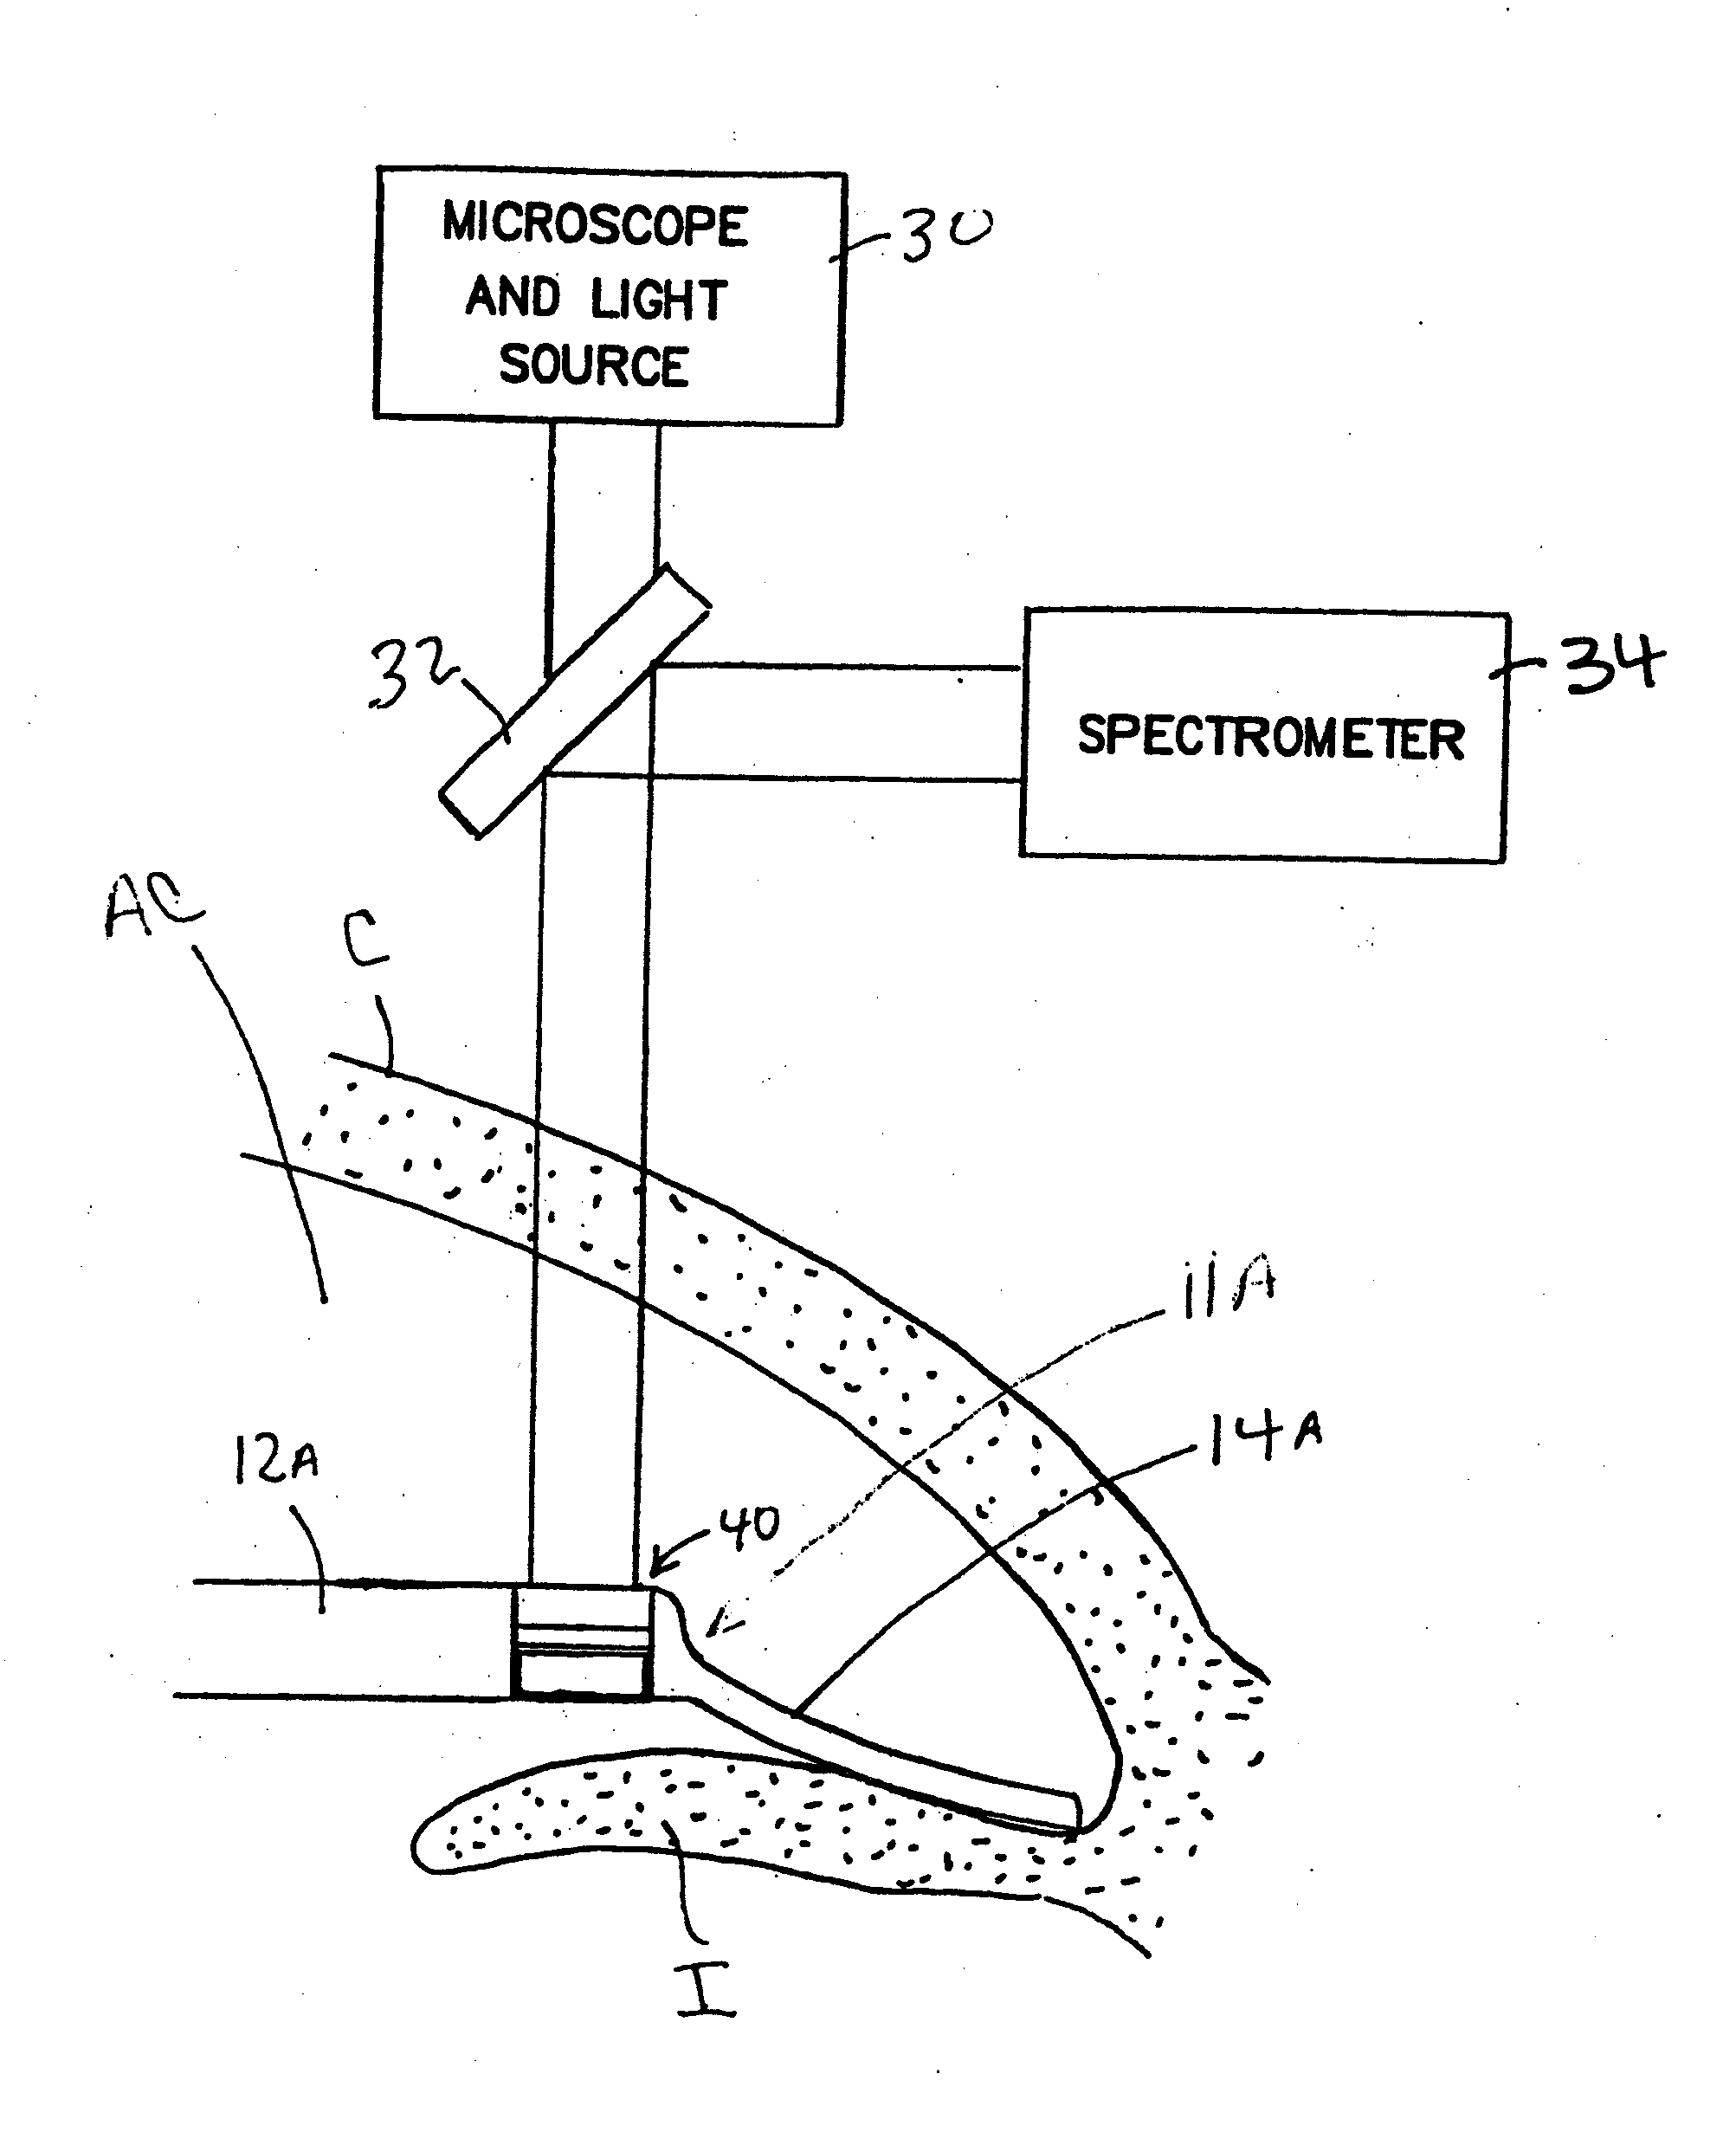 Implantable Devices and Methods for Measuring Intraocular, Subconjunctival or Subdermal Pressure and/or Analyte Concentration